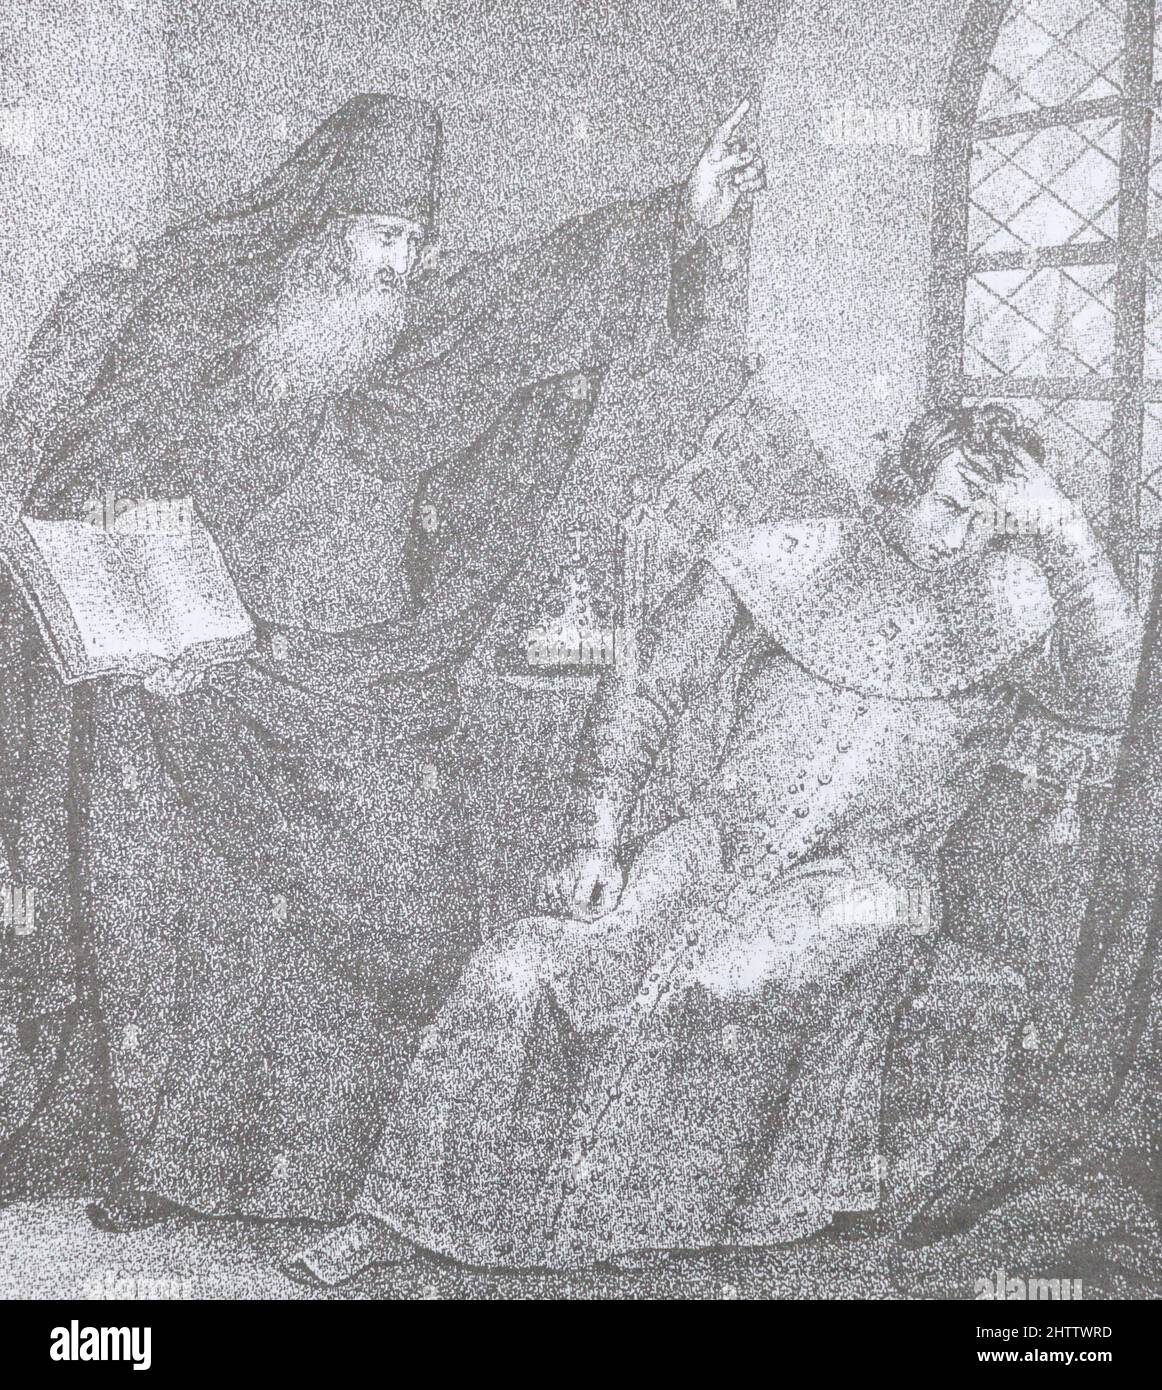 Sylvester, having opened the Holy Scripture before Tsar Ivan IV, conjures him to be a zealous executor of the charters. Medieval engraving. Stock Photo